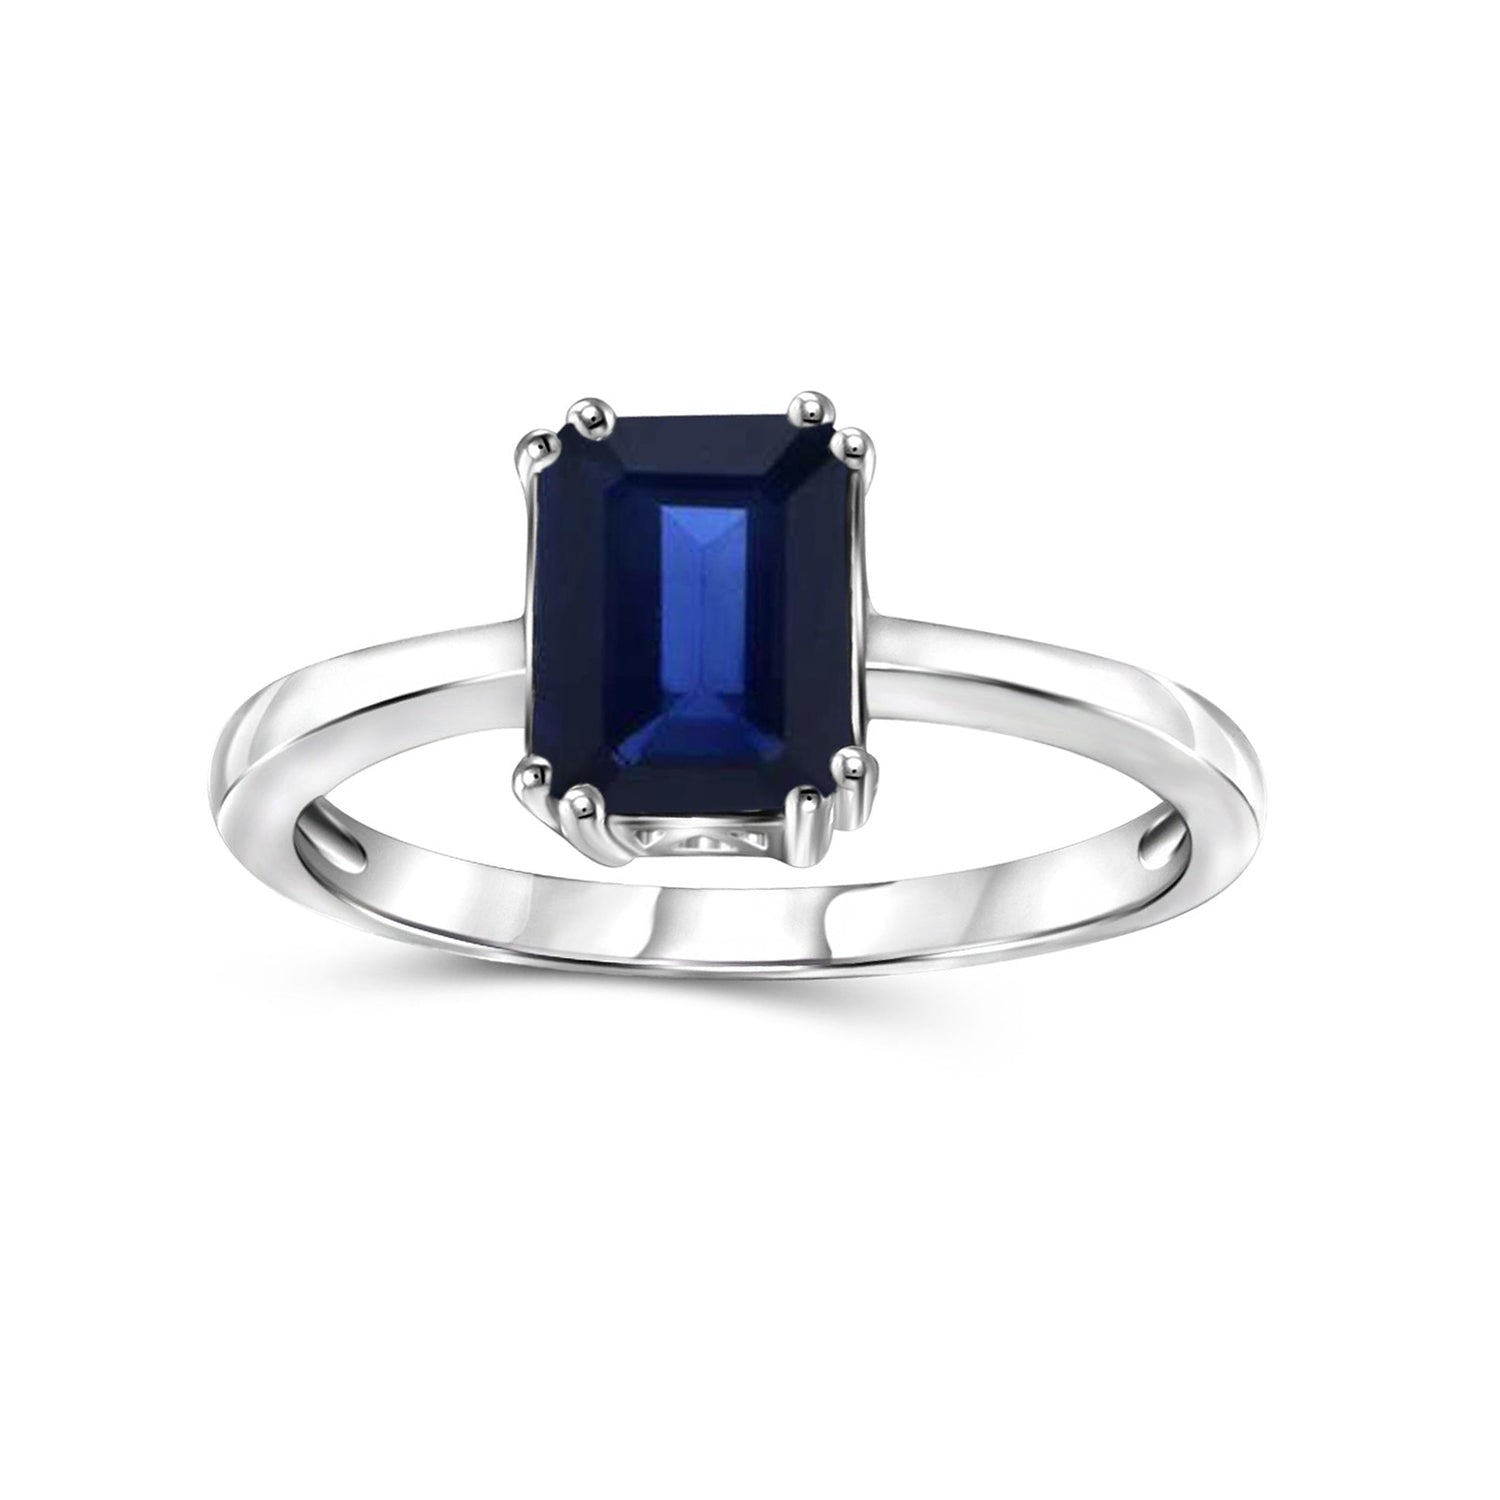 2 Carat T.G.W. Sapphire Sterling Silver Ring